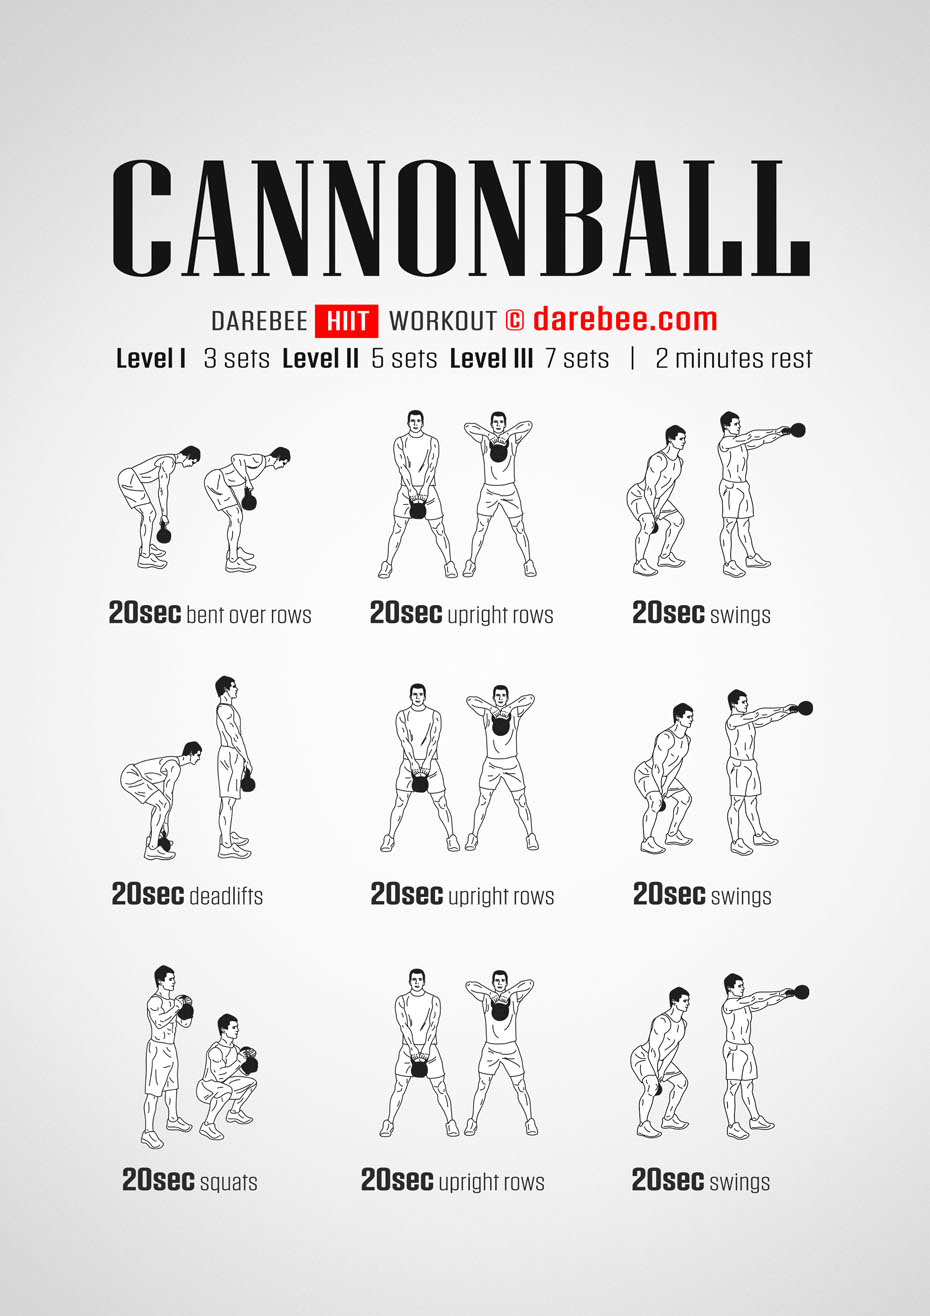 Cannonball is a Darebee home-fitness kettlebell workout for total body strength and wellbeing. 